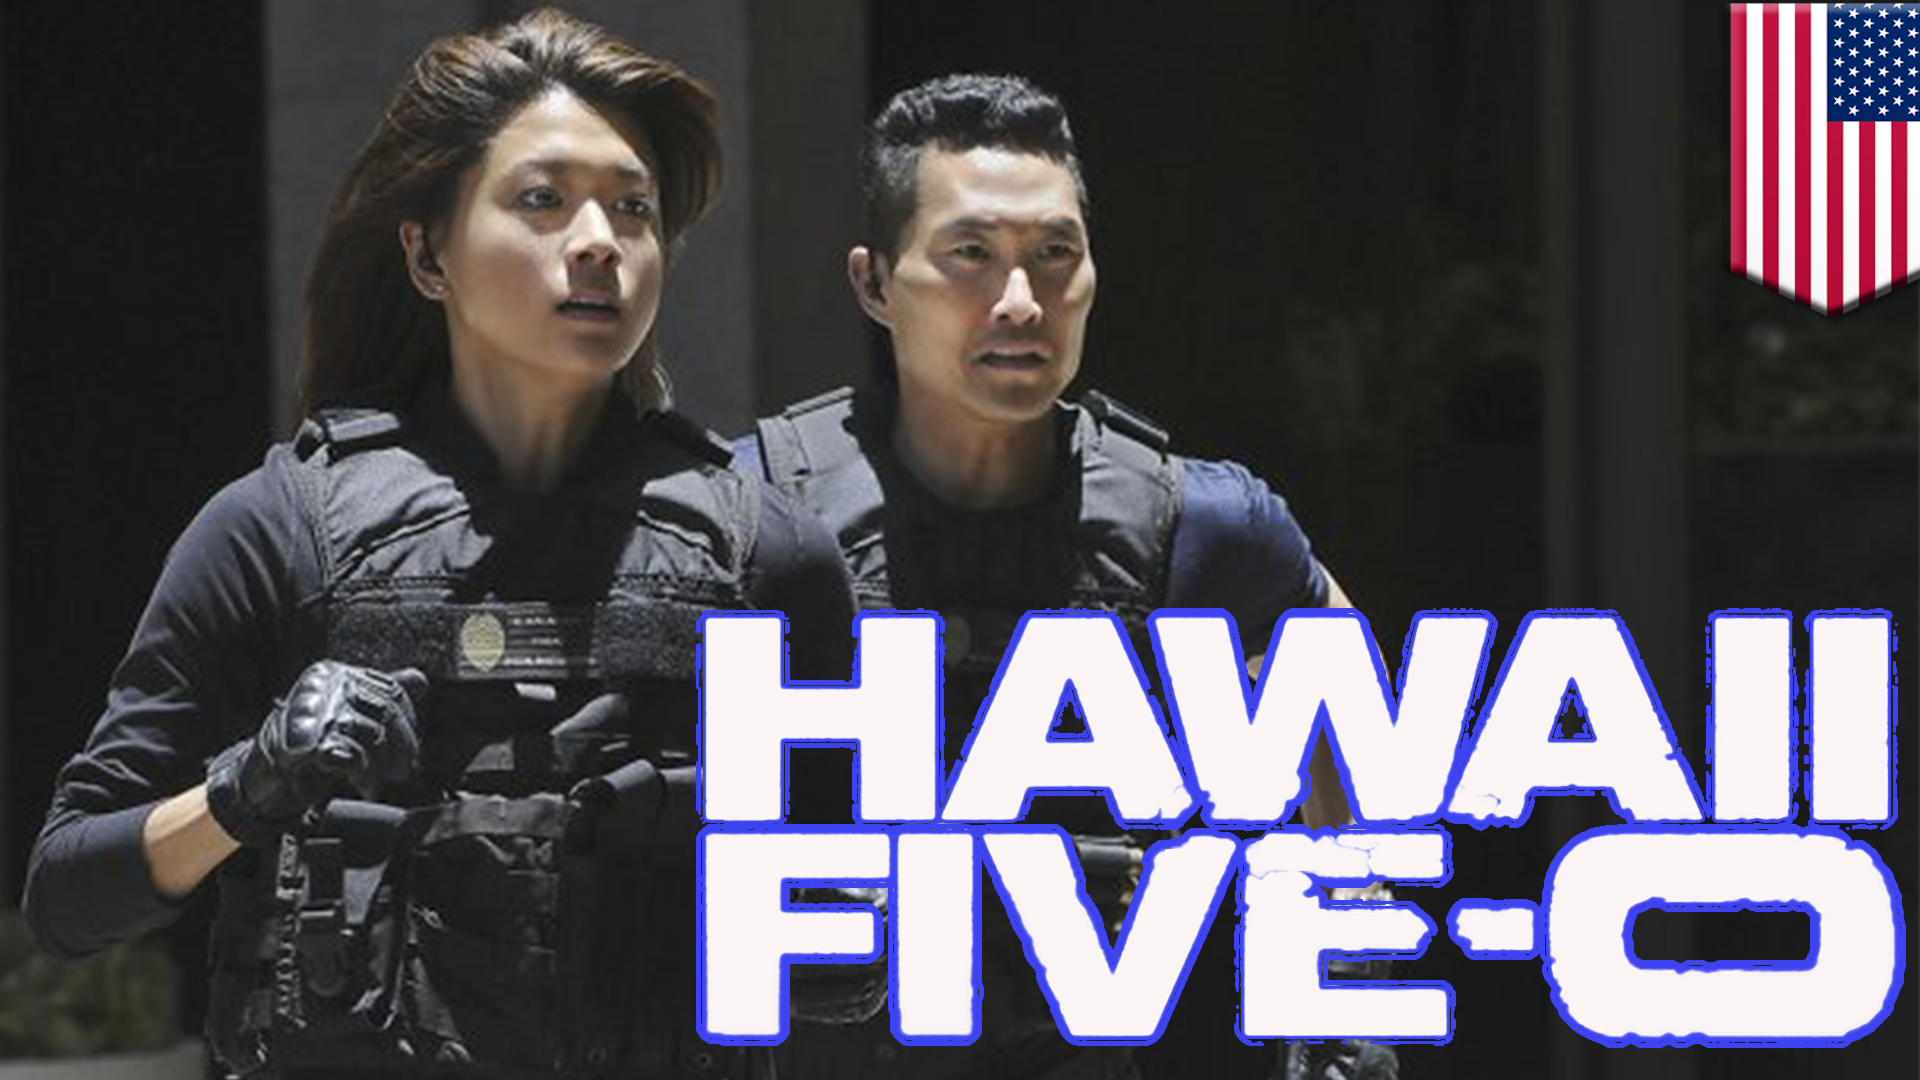 Hawaii Five-o Is Losing Some Serious Color - Hawaii Five 0 Kono Muere , HD Wallpaper & Backgrounds